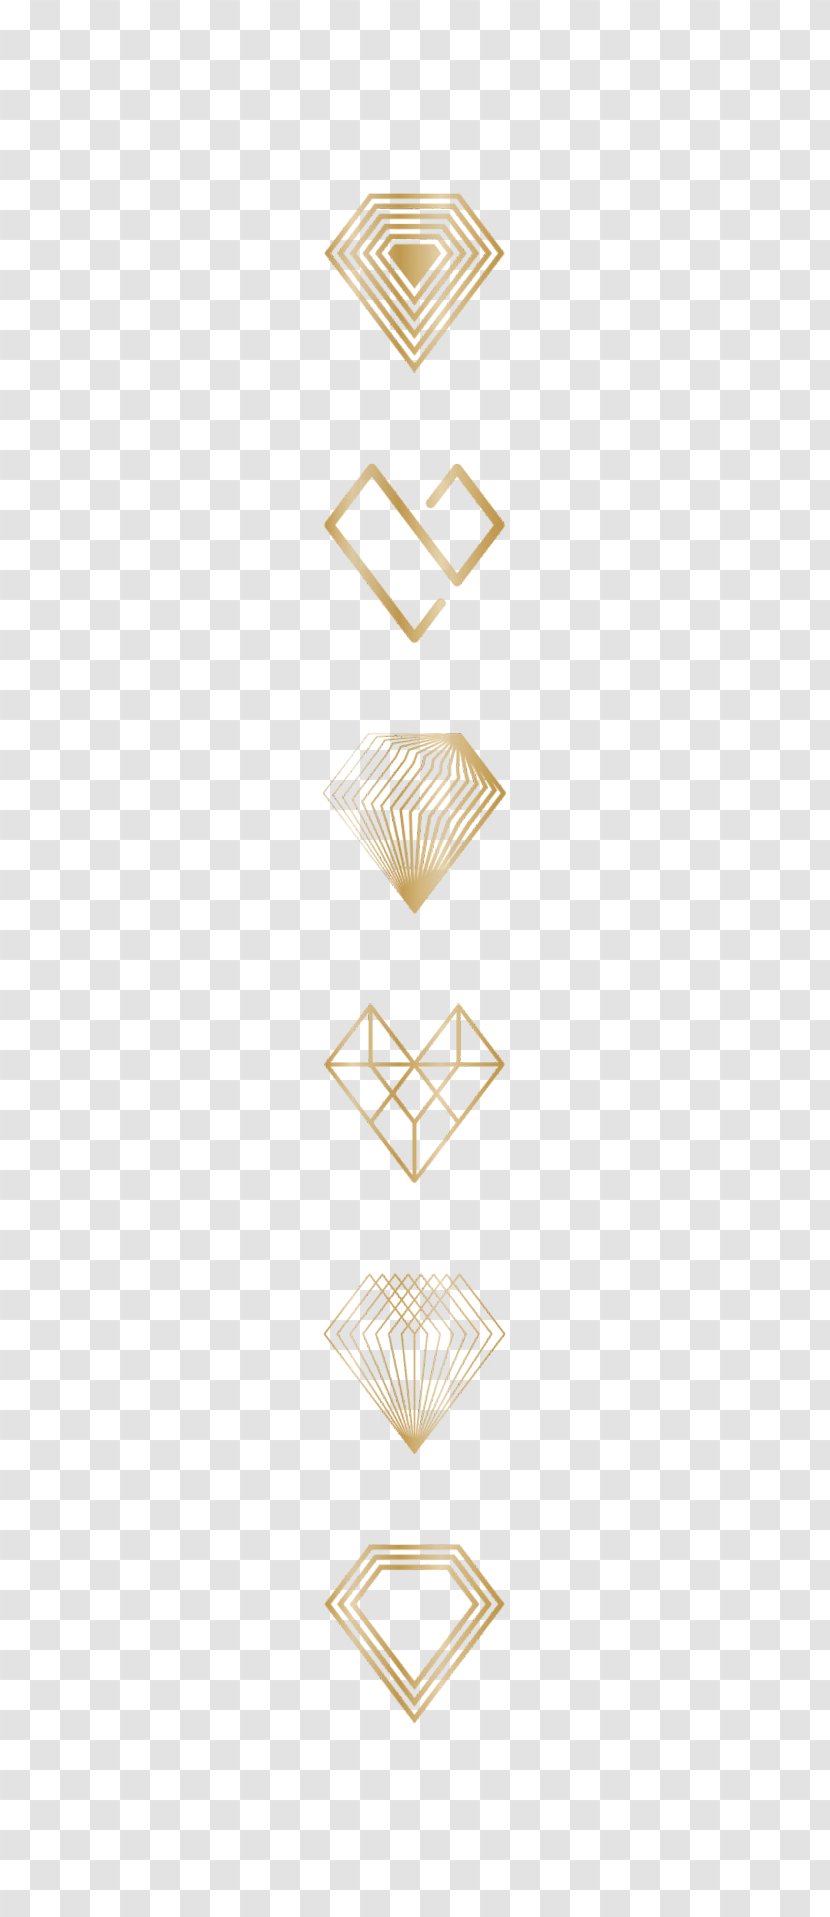 Europe Gold Search Engine - Google Images - Vector Icon Transparent PNG